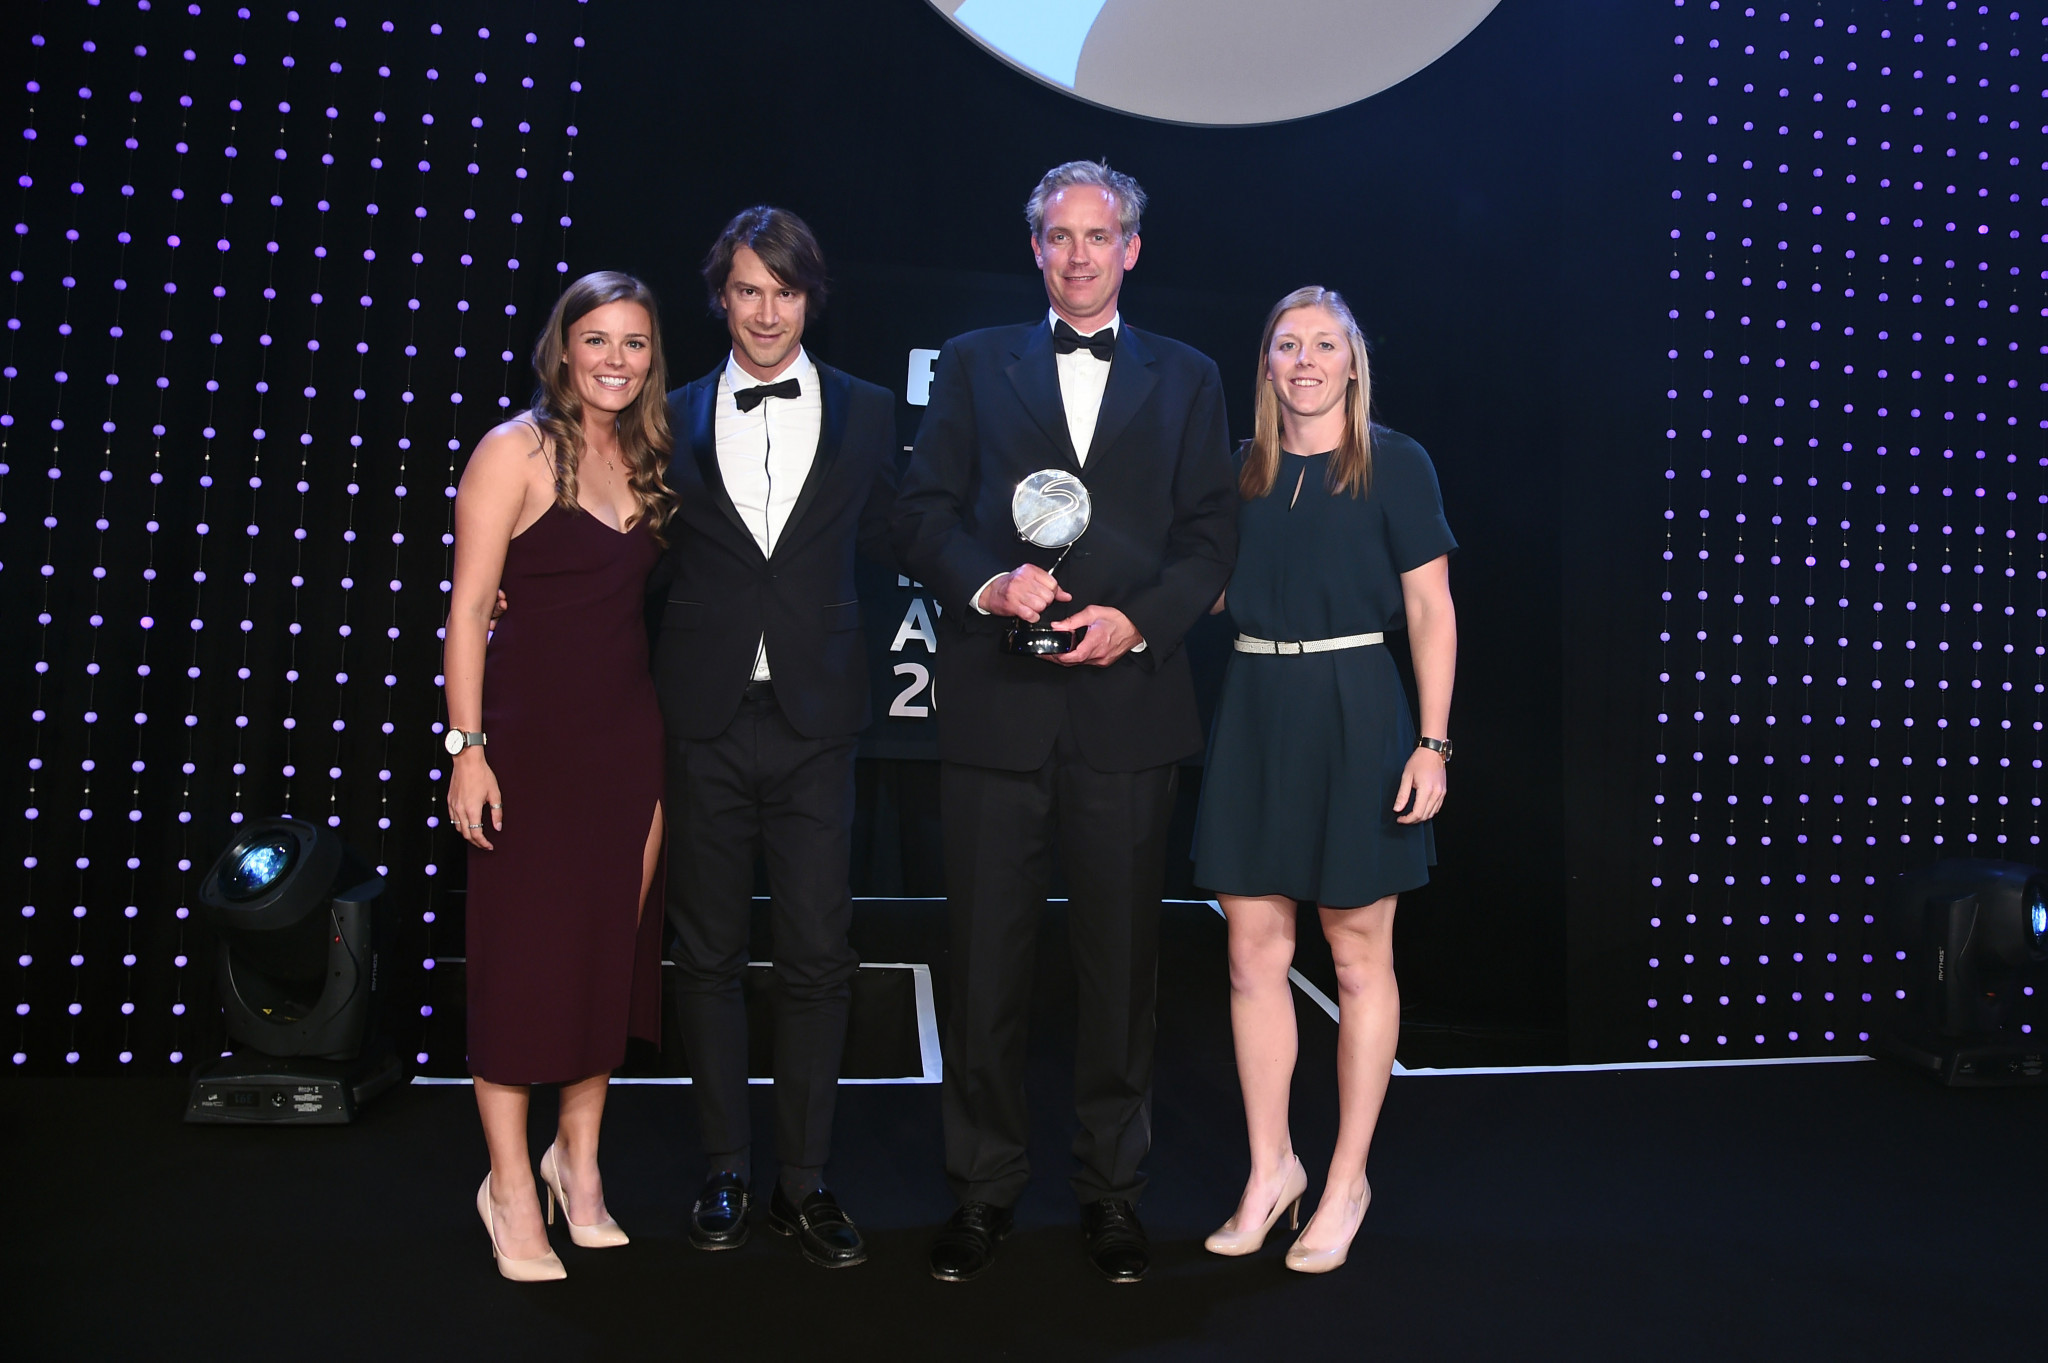 The Ocean Race fought off tough competition from across the sport industry to scoop a pair of prizes at a star-studded BT Sport Industry Awards ceremony in London ©Getty Images